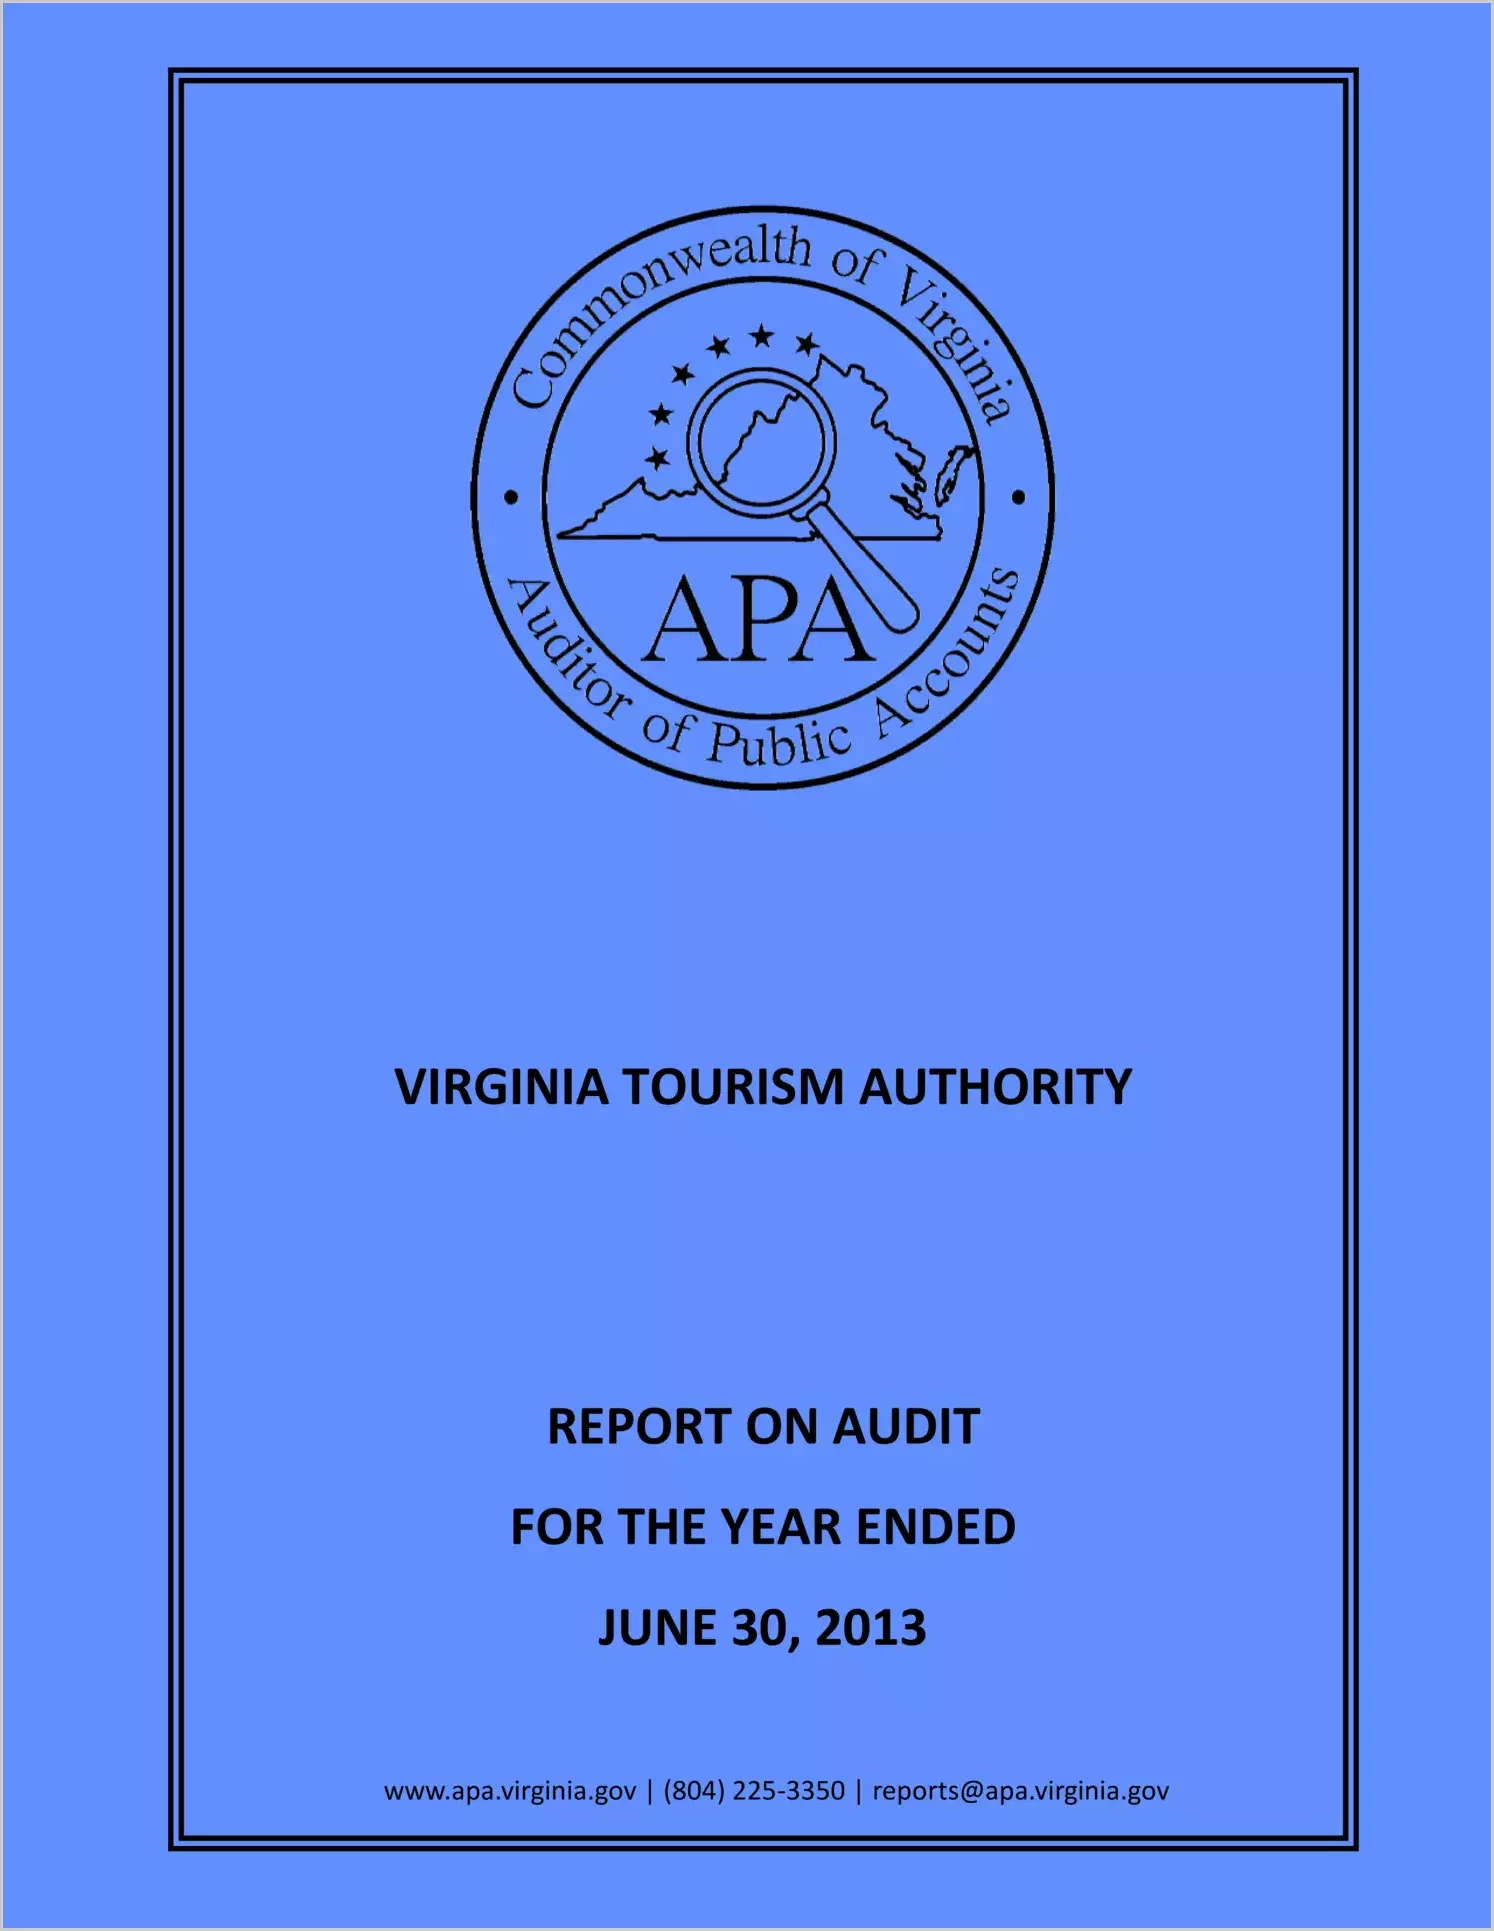 Virginia Tourism Authority for the year ended June 30, 2013